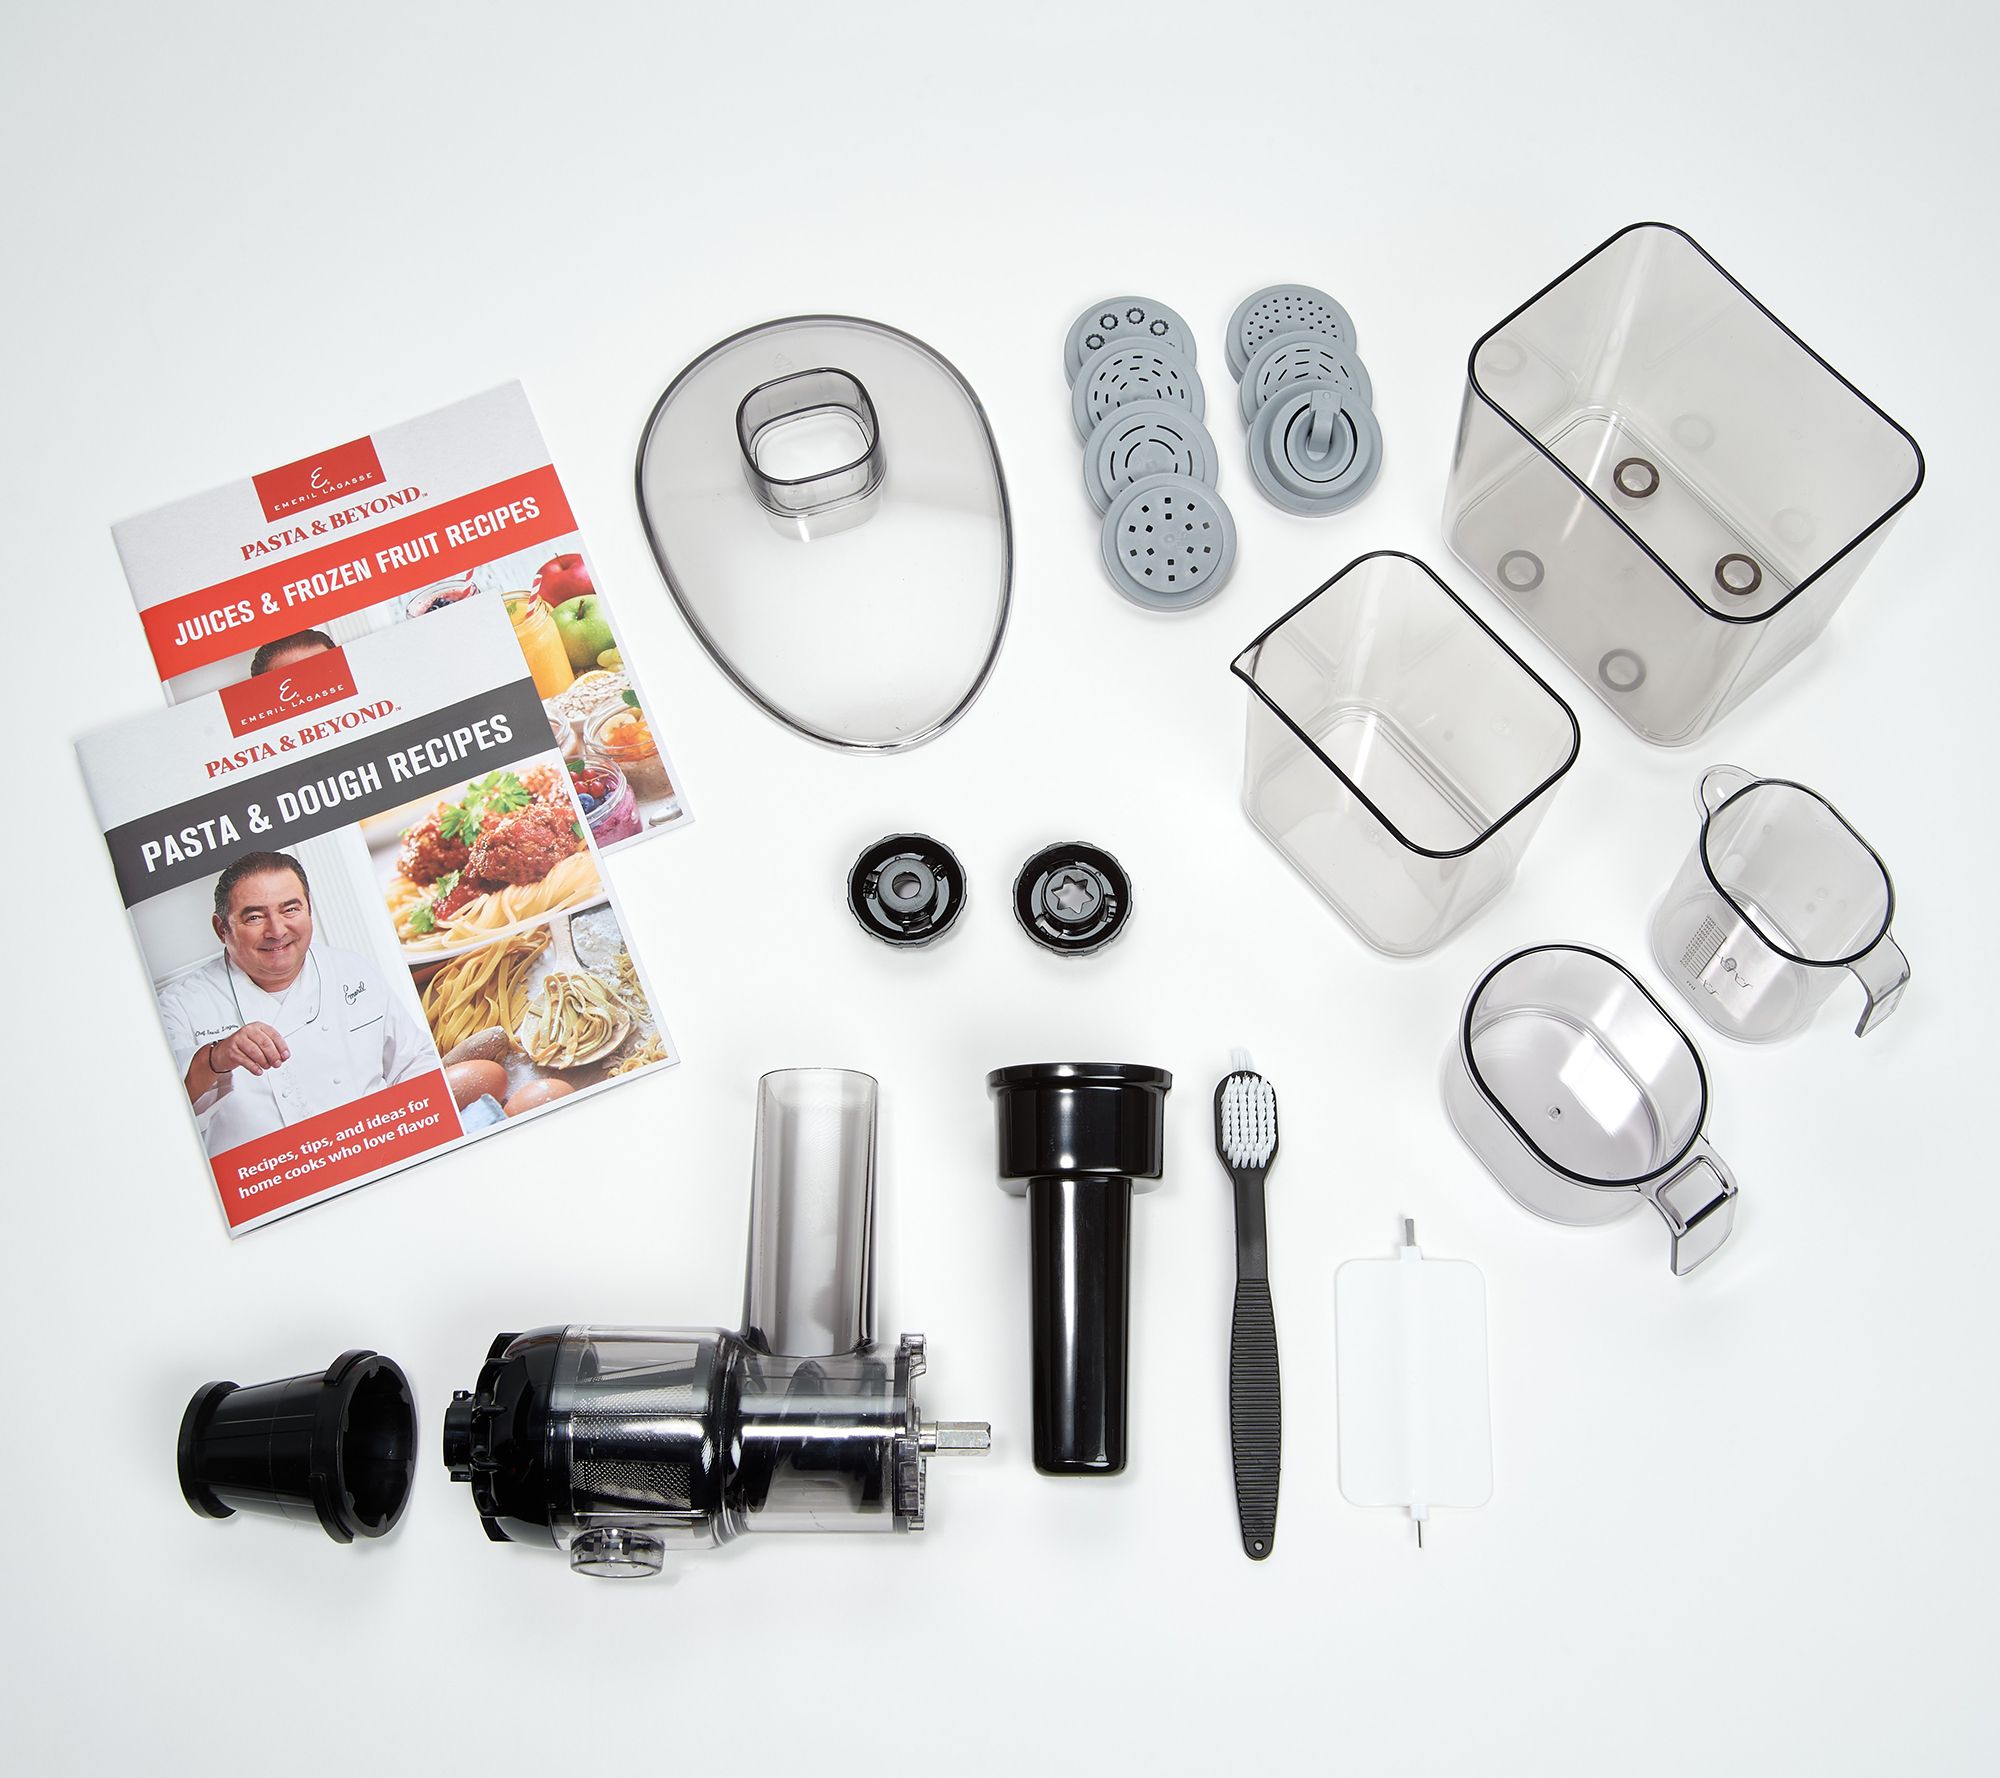 Emeril Lagasse Pasta & Beyond - How to Assemble Pasta Maker Accessories 